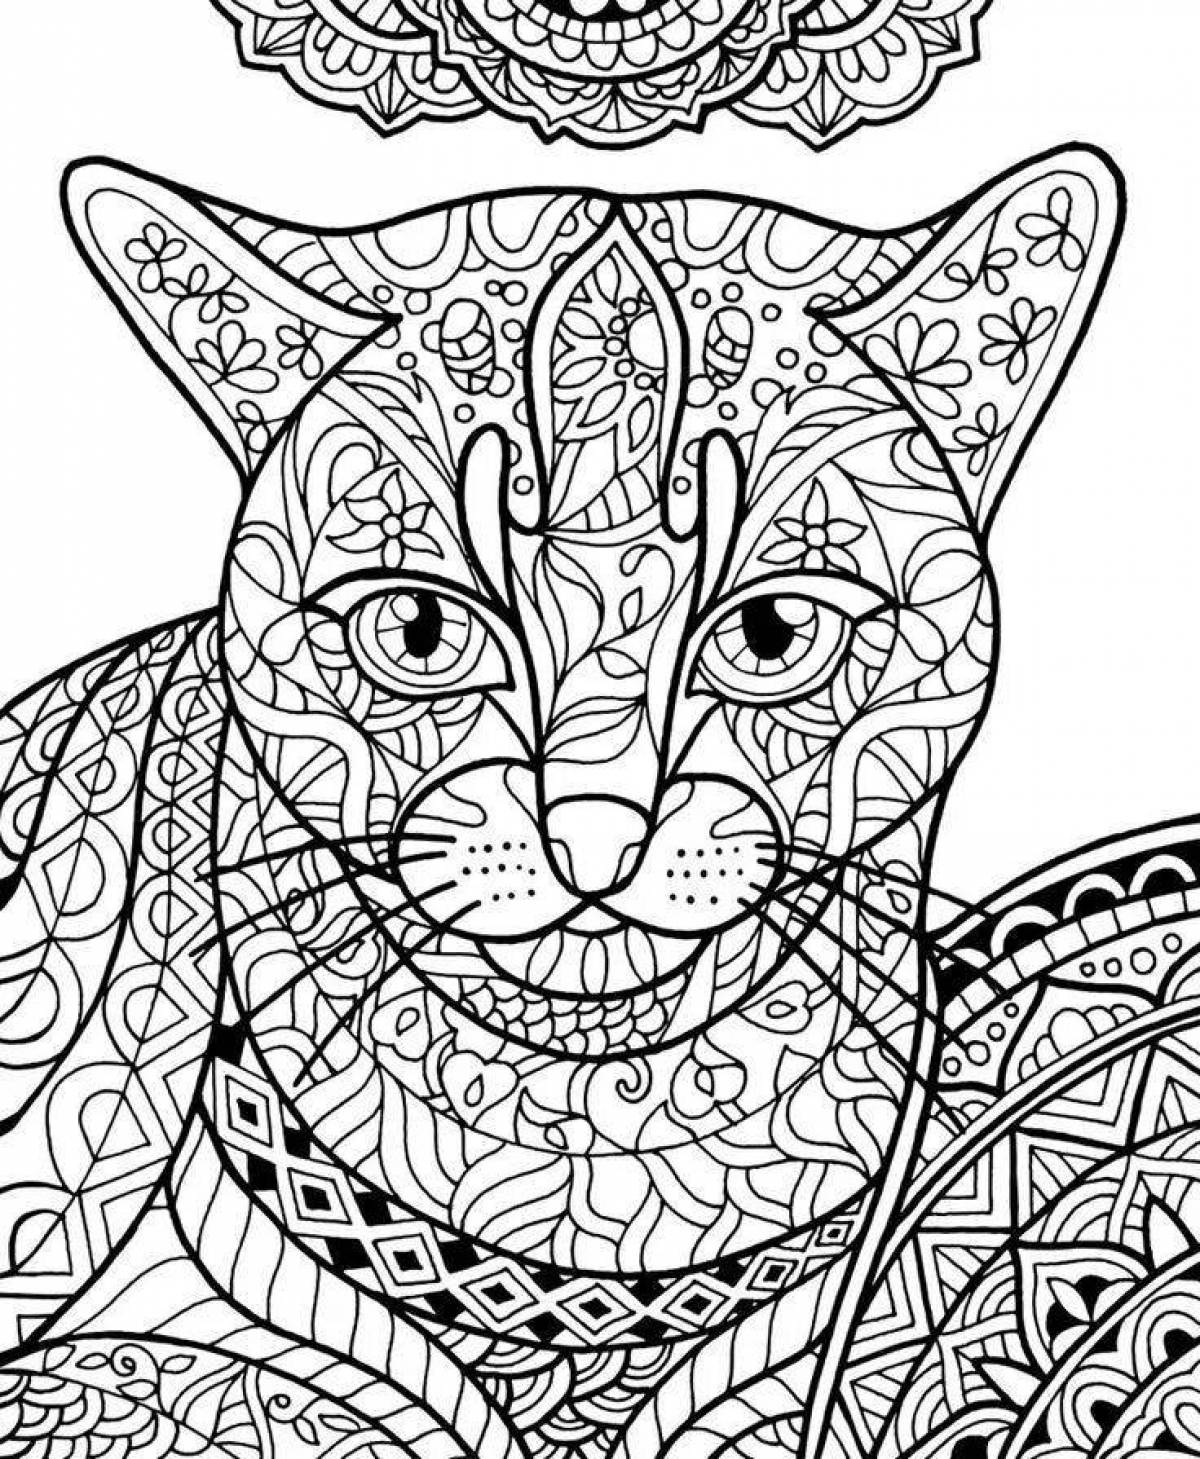 Glorious coloring complex cats